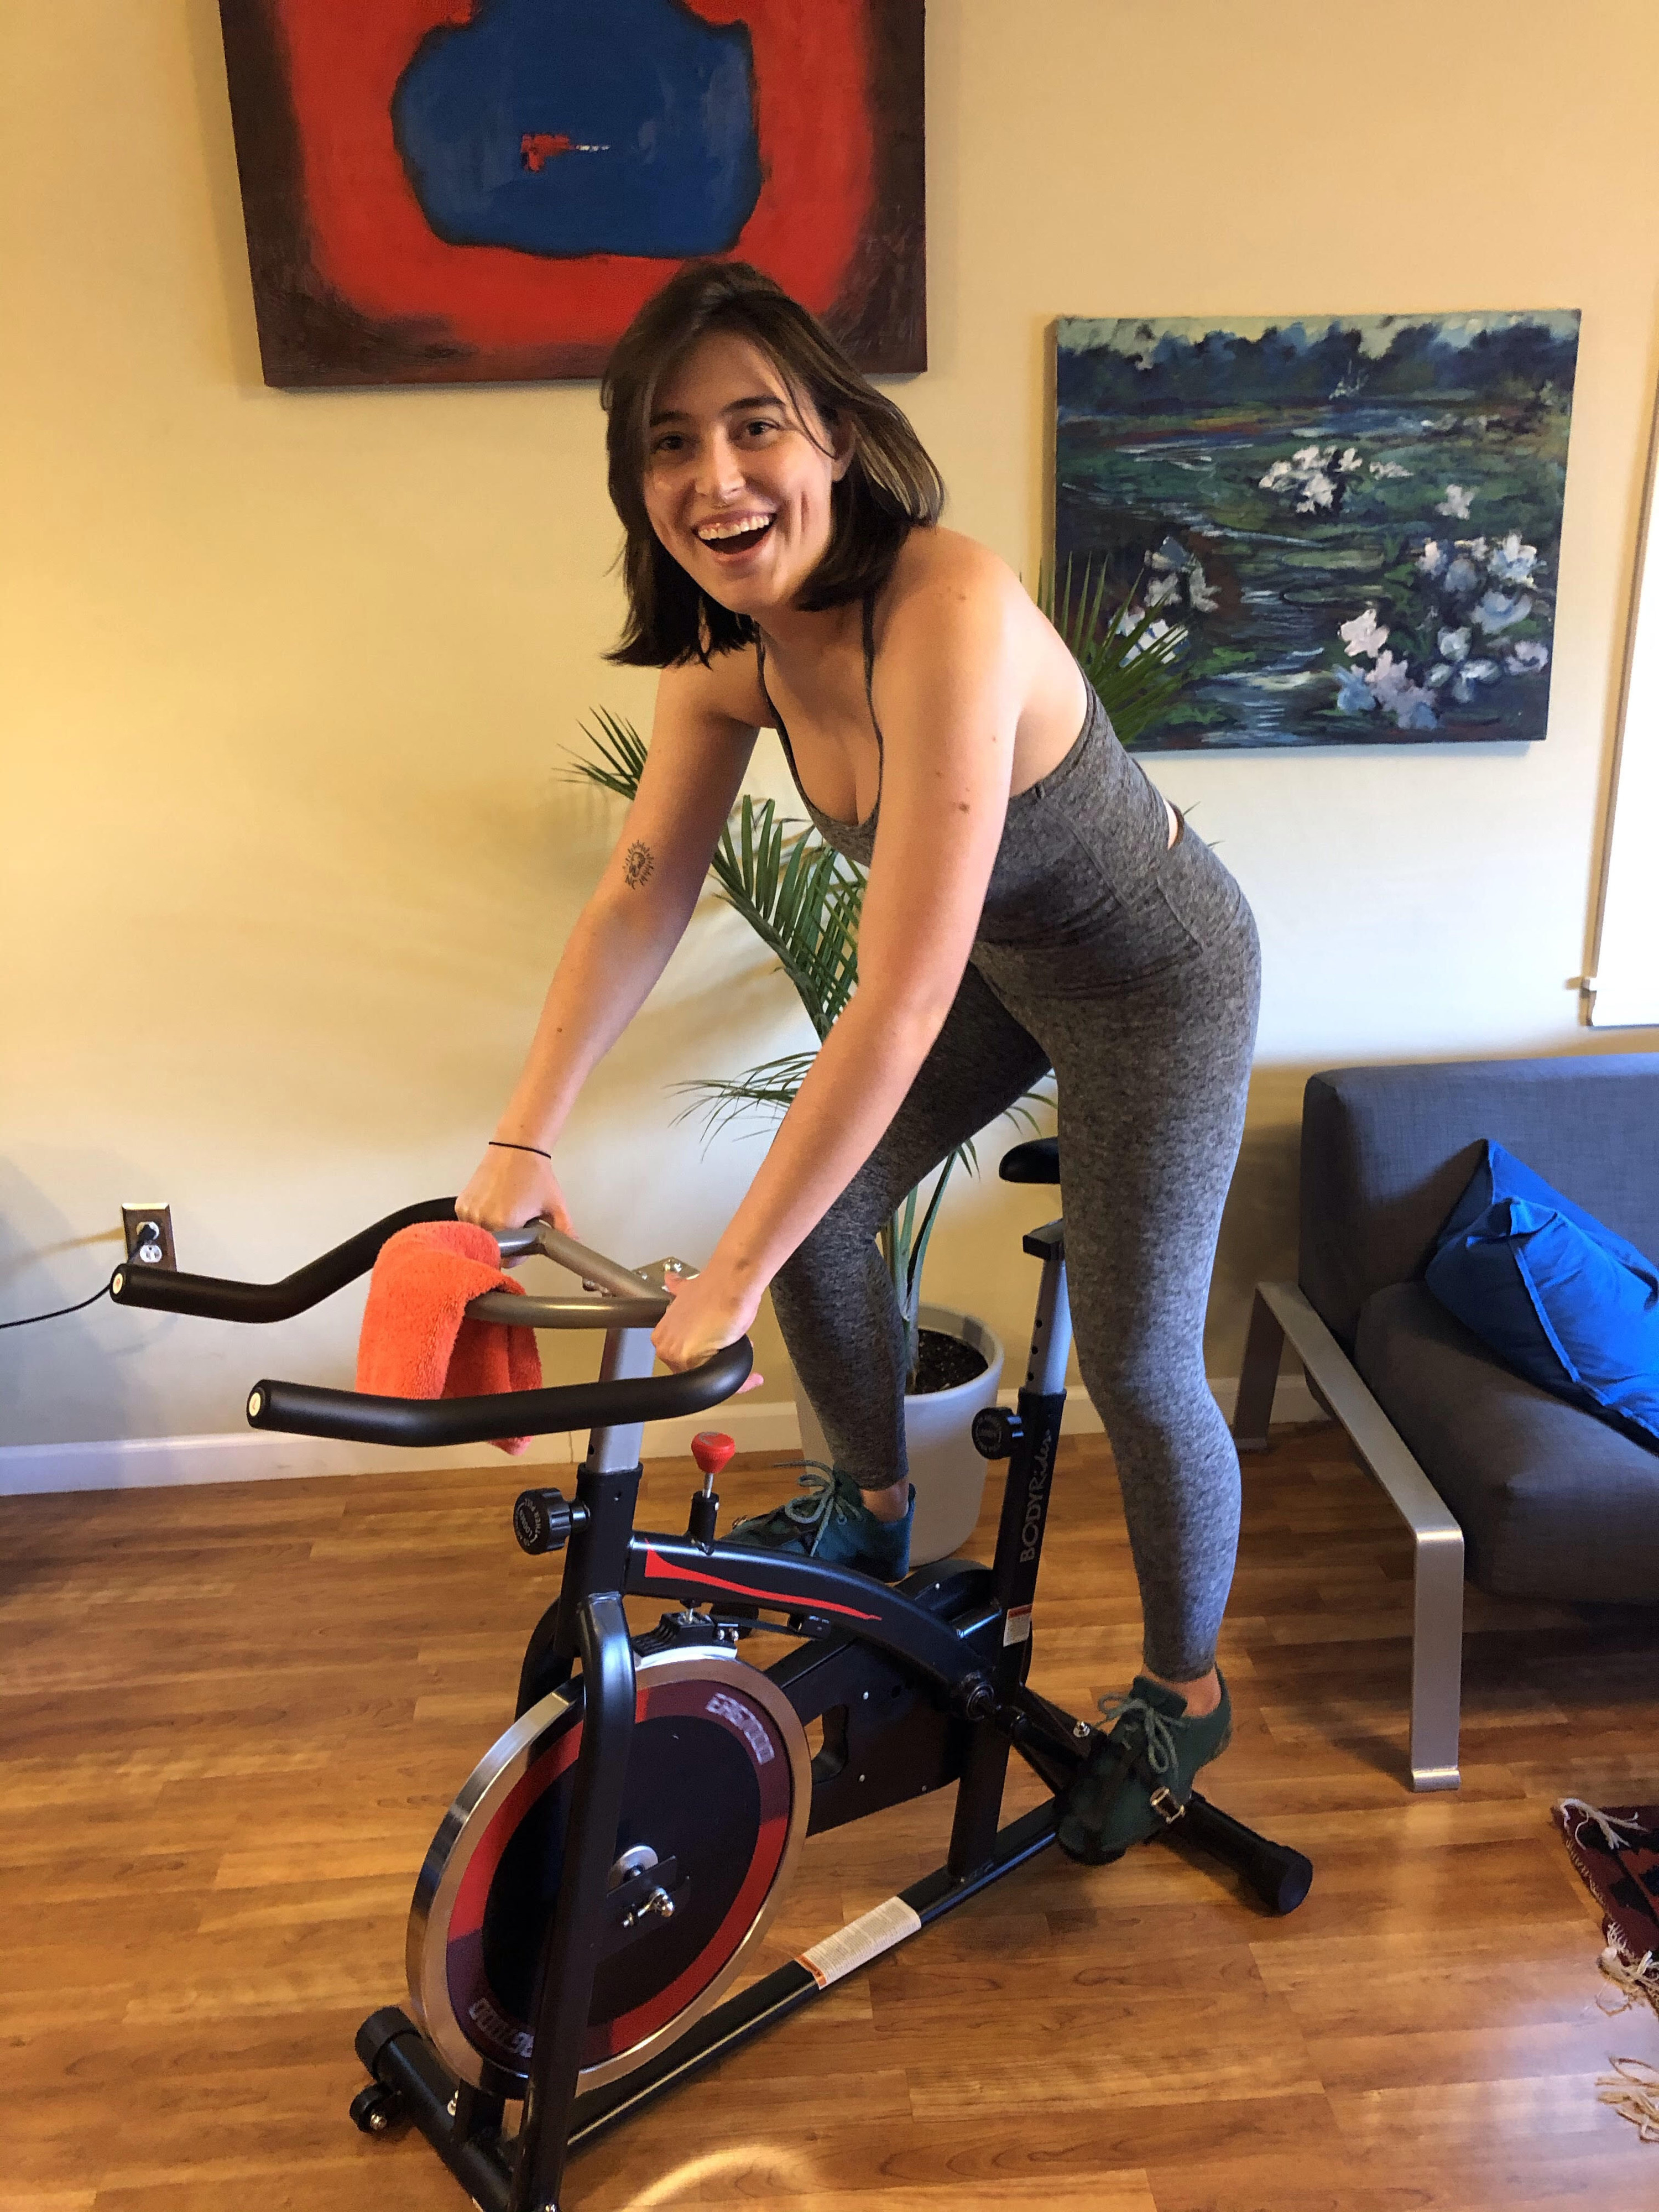 BuzzFeed writer Rachel Dunkle wearing the grey cropped tank top and leggings while riding a stationary bike.